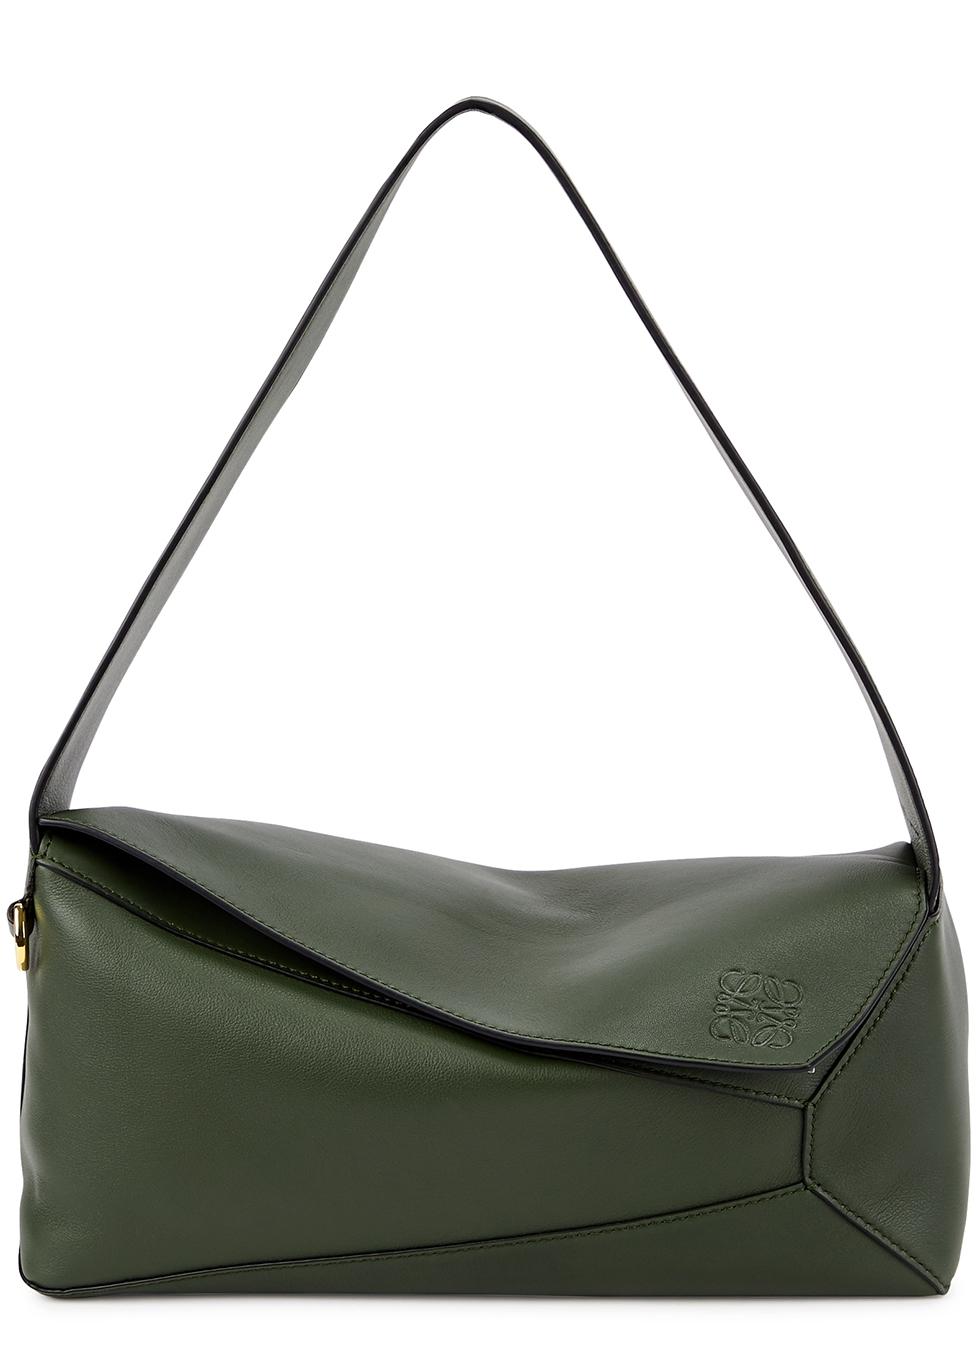 Loewe Puzzle Leather Hobo Bag in Green | Lyst